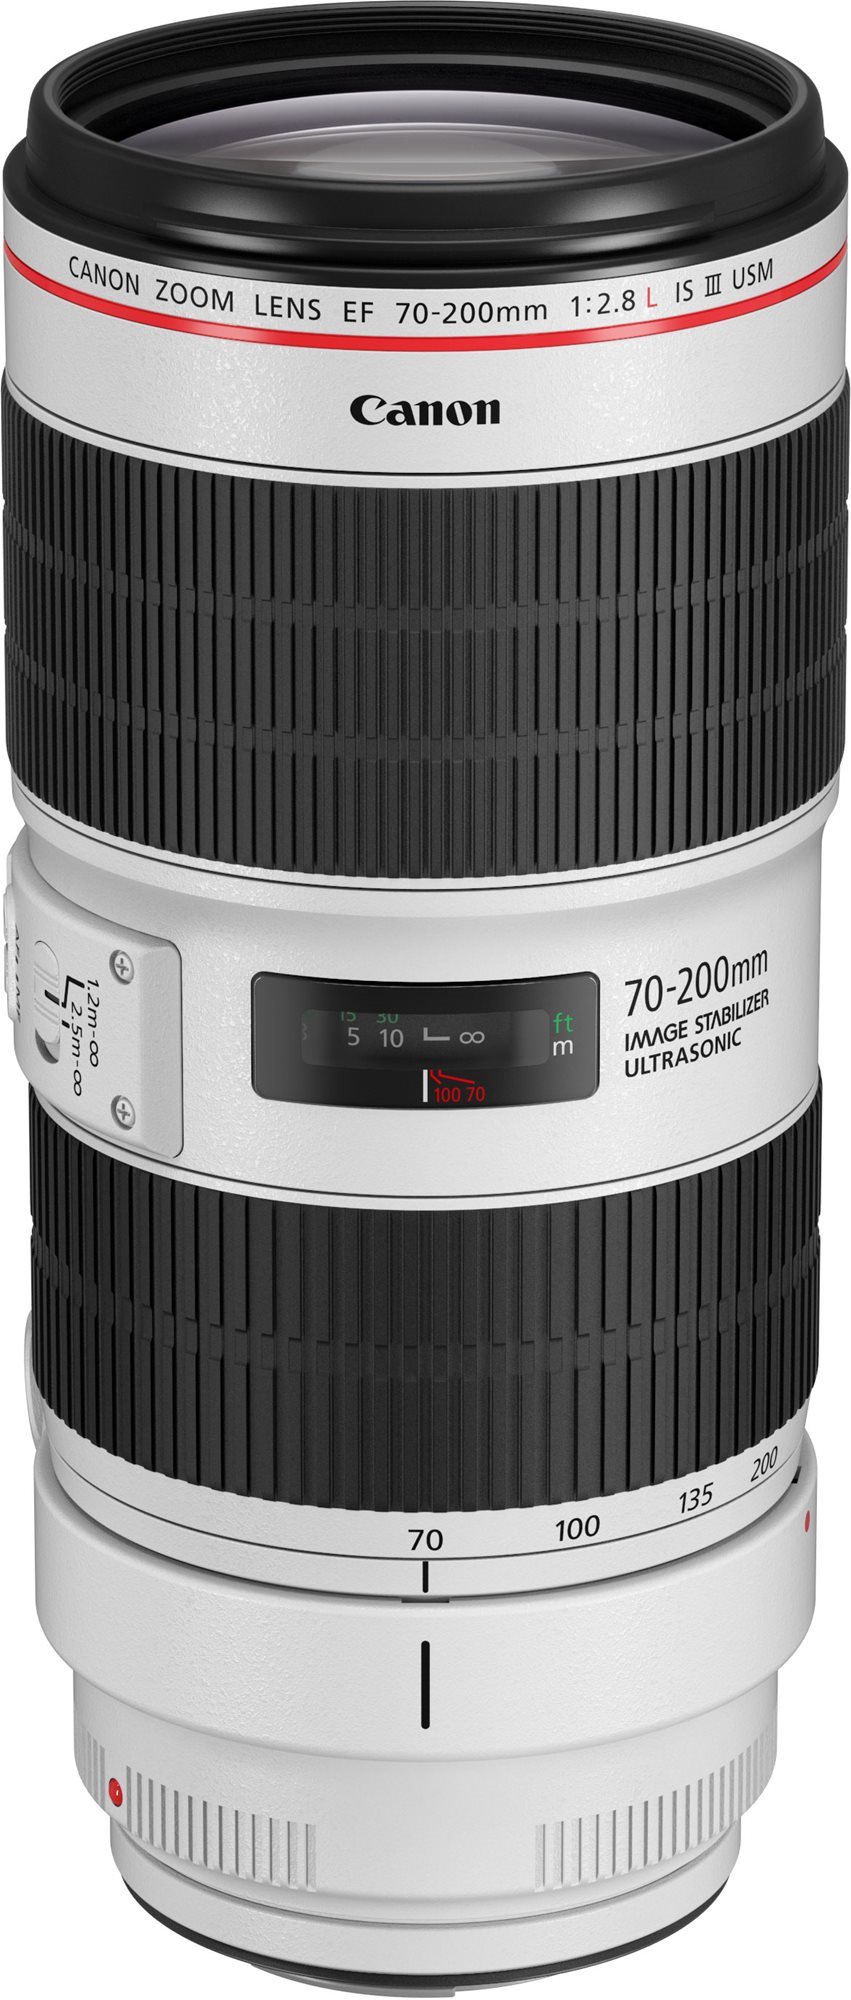 Canon ef 70-200mm f/2.8 l is iii usm